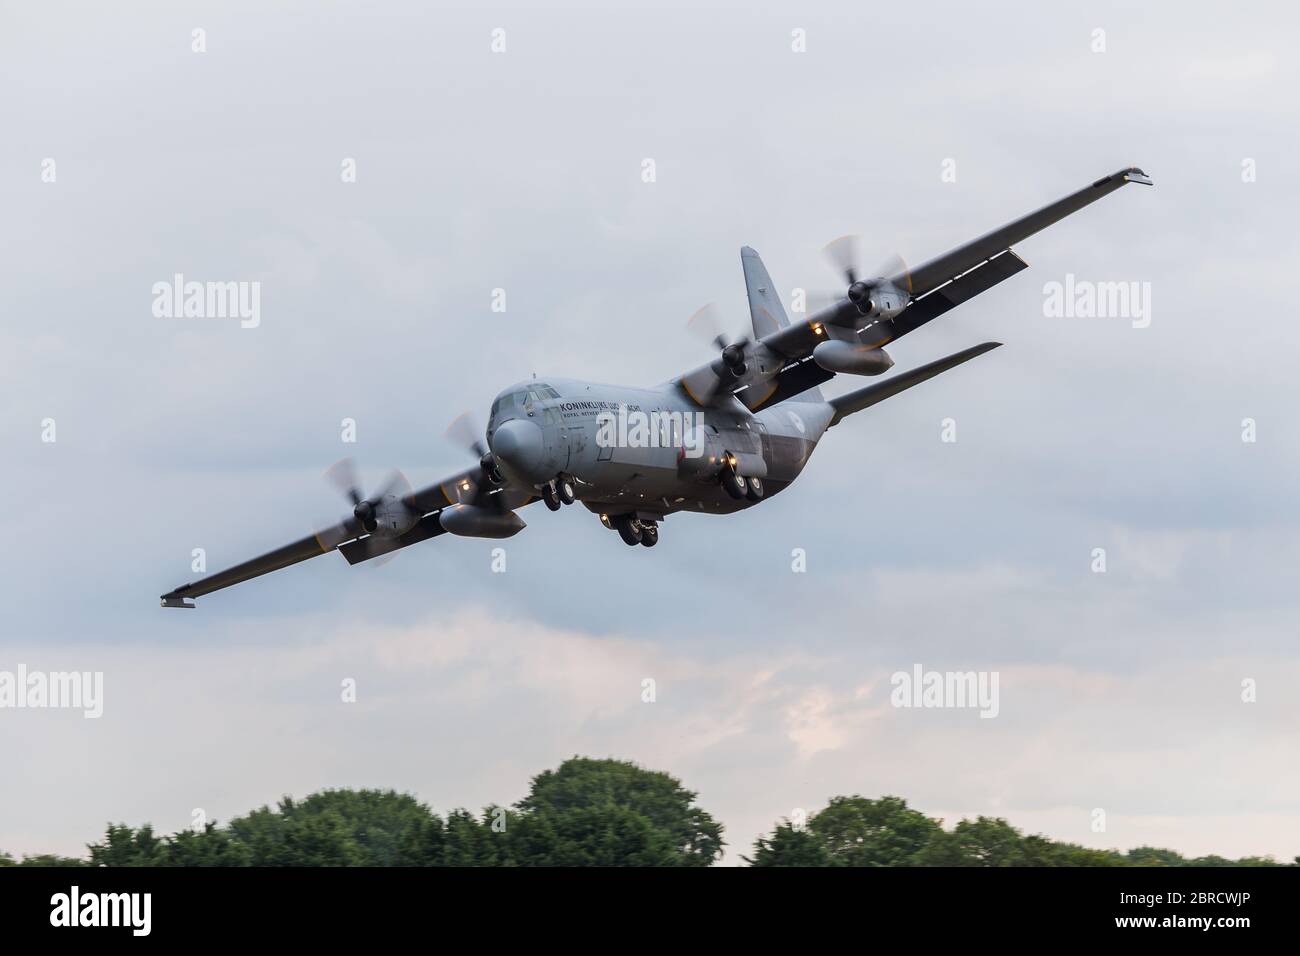 C-130H-30 from the Royal Netherlands Air Force seen at Fairford in England in July 2017. Stock Photo